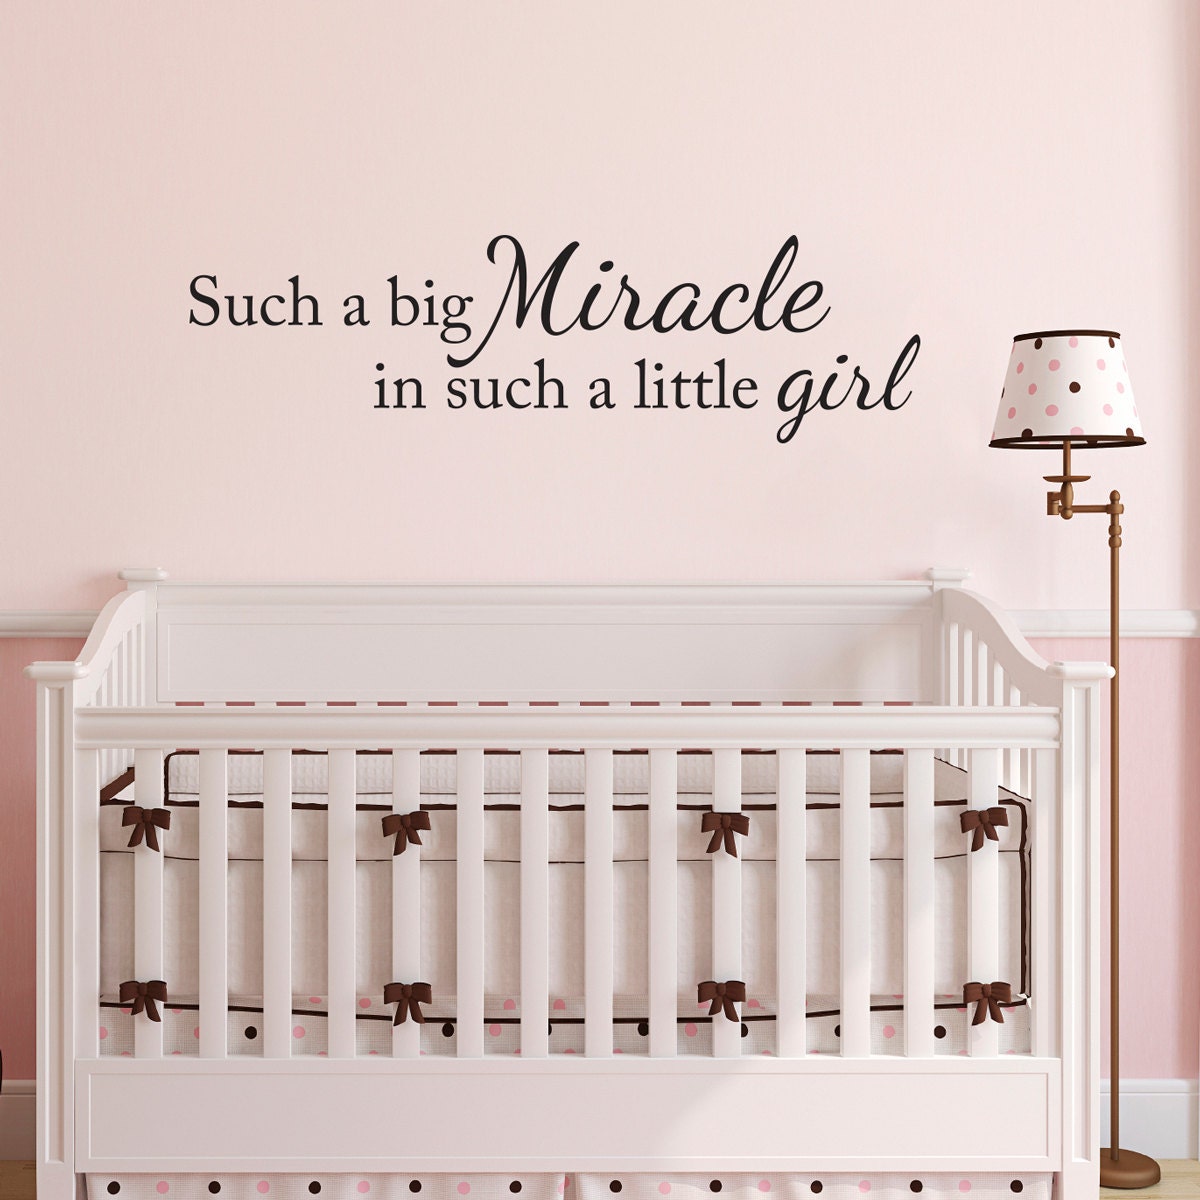 Such a big Miracle in such a little girl Decal - Girl Nursery Decal Quote - Large